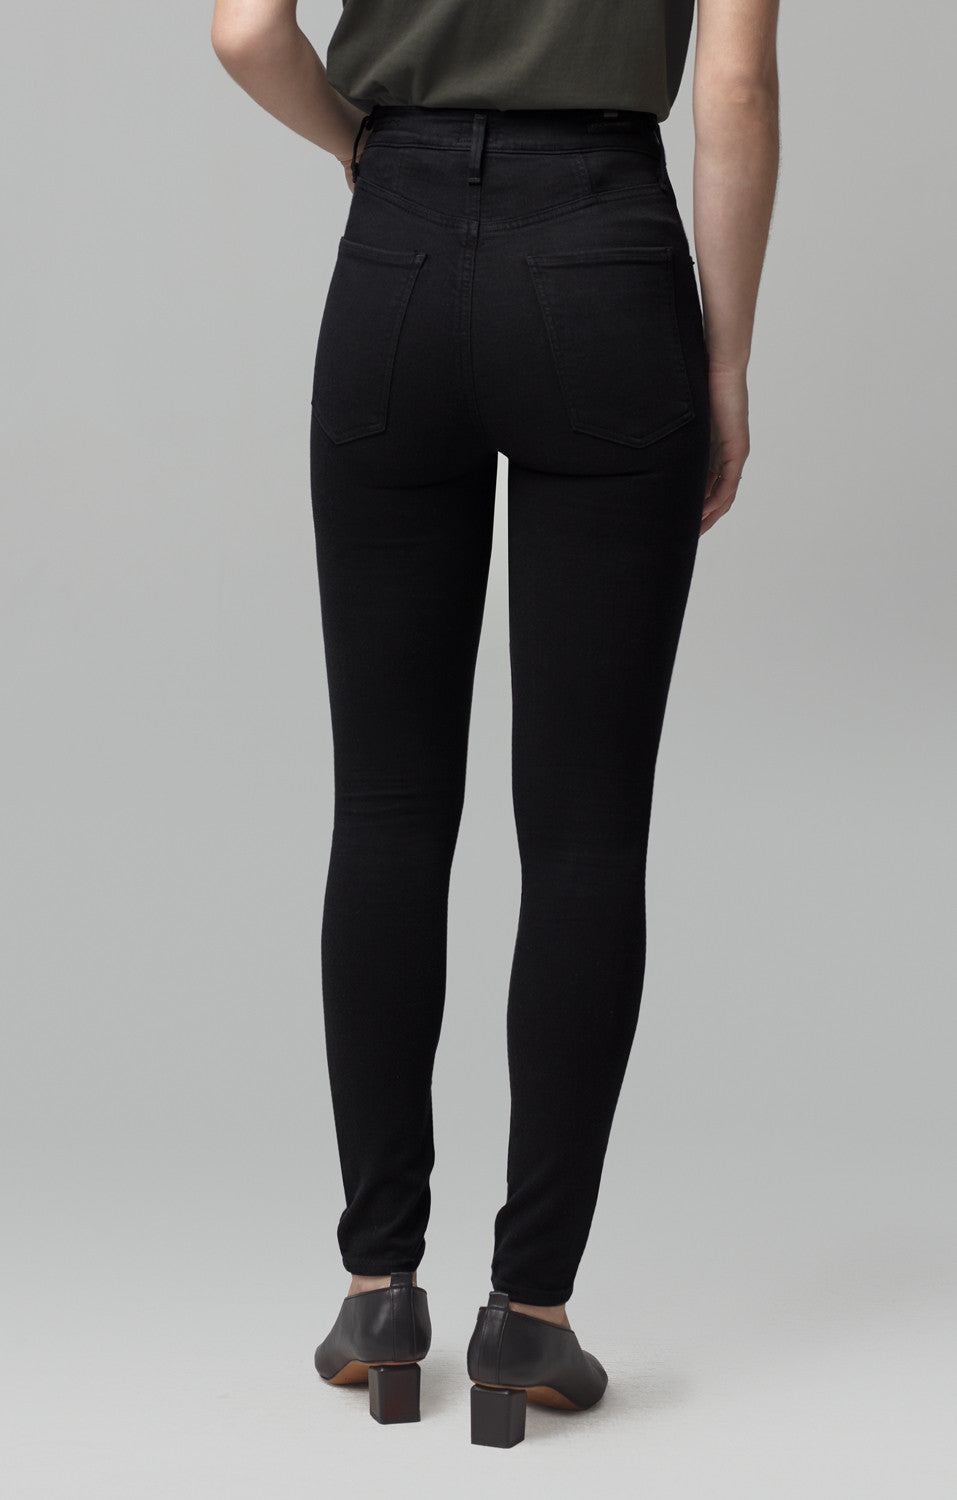 Citizens of Humanity - Chrissy Uber High-rise Skinny Jeans